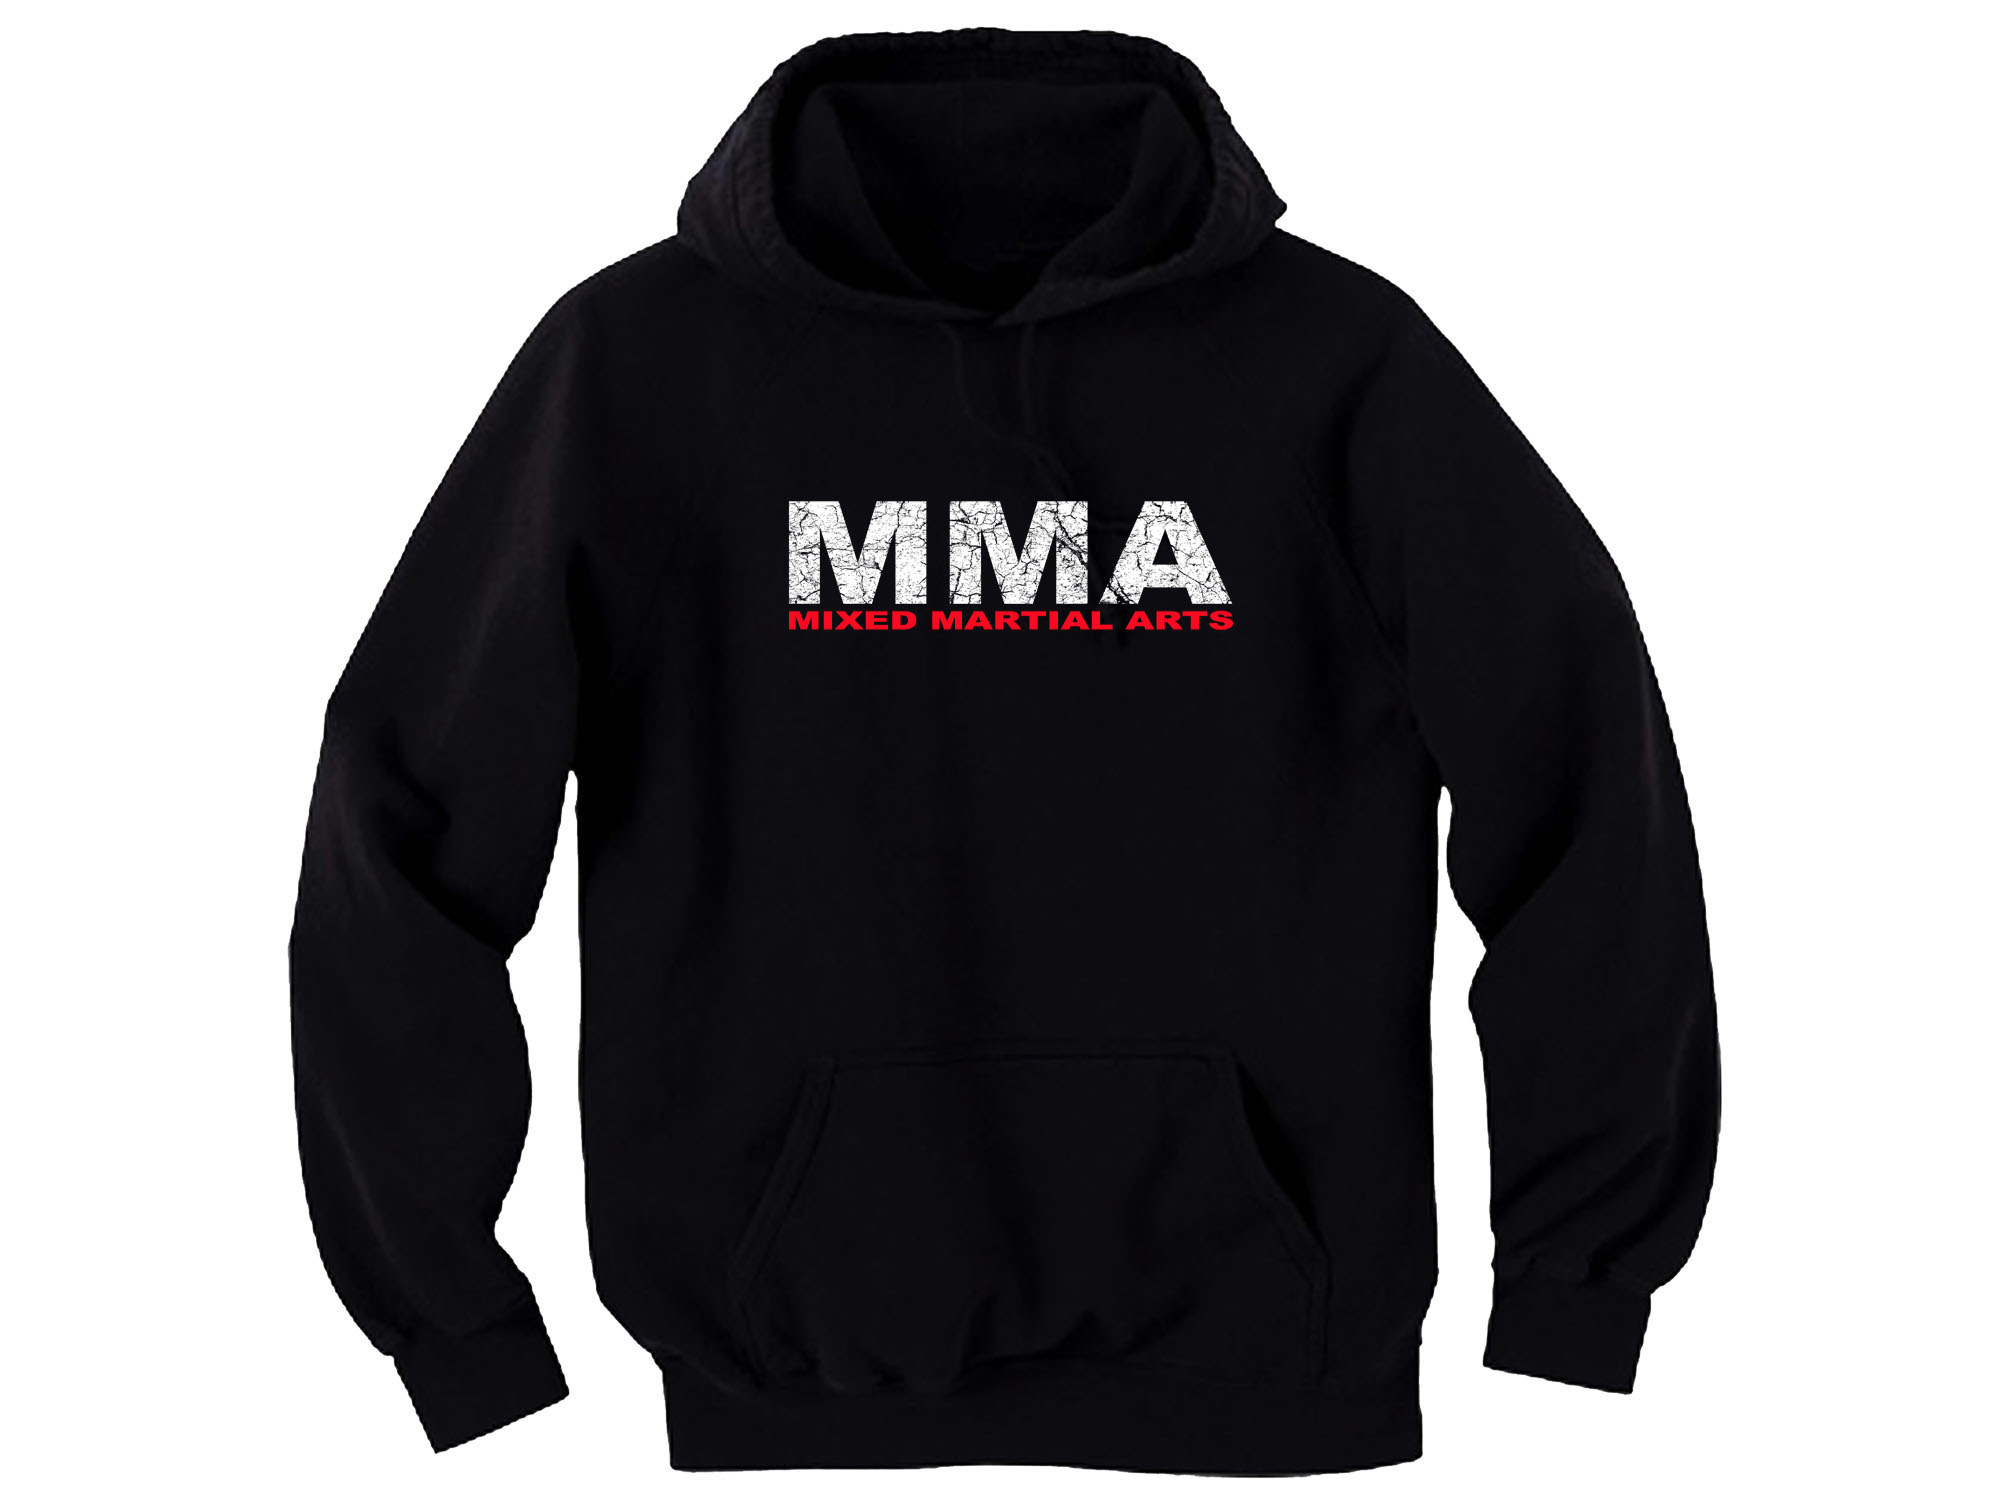 MMA mixed martial arts pullover hoodie